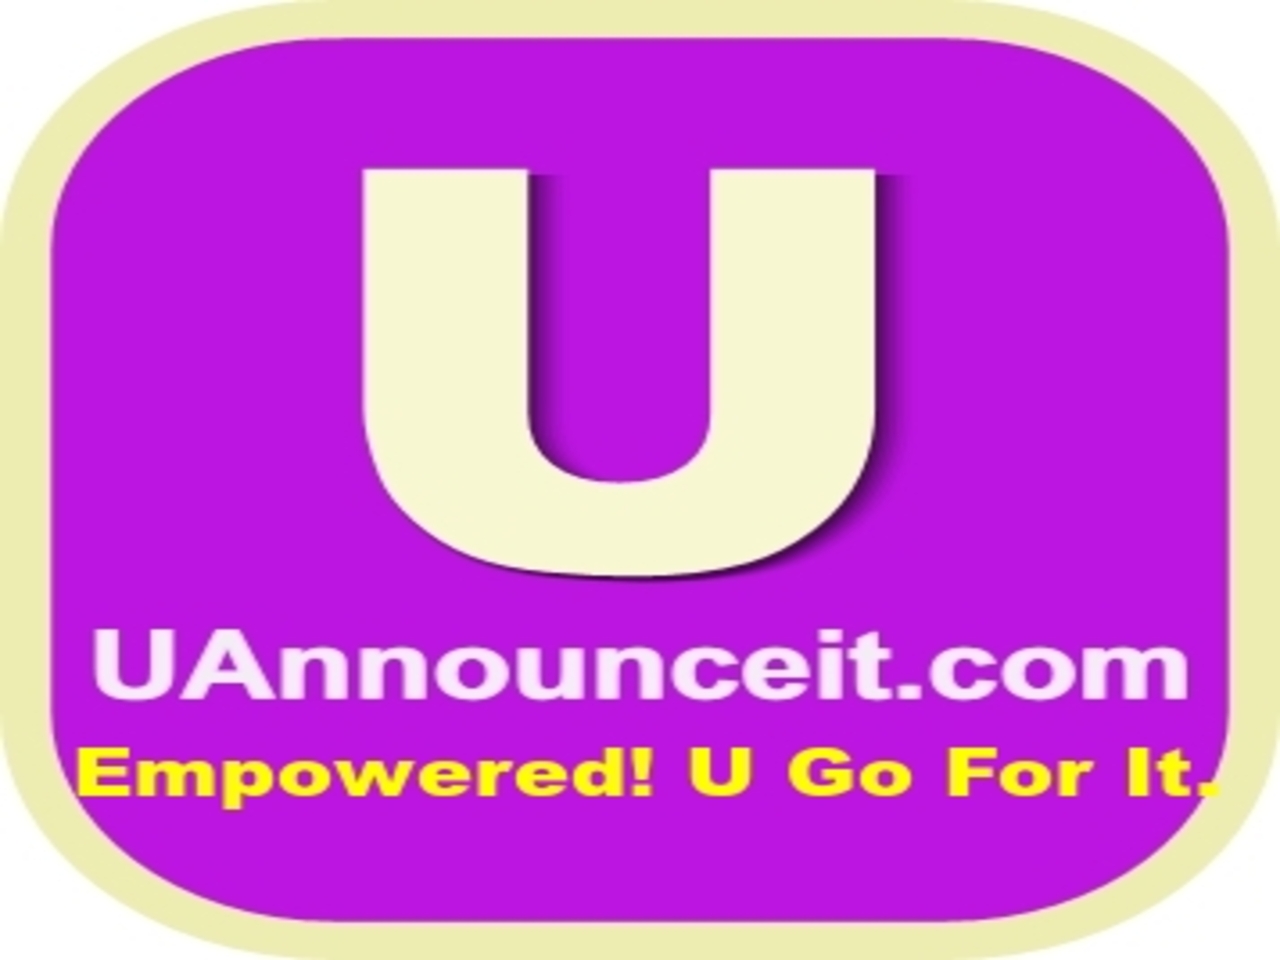 UAnnounceit introduces UAnnounceit™ as an active UK-based social media networking platform